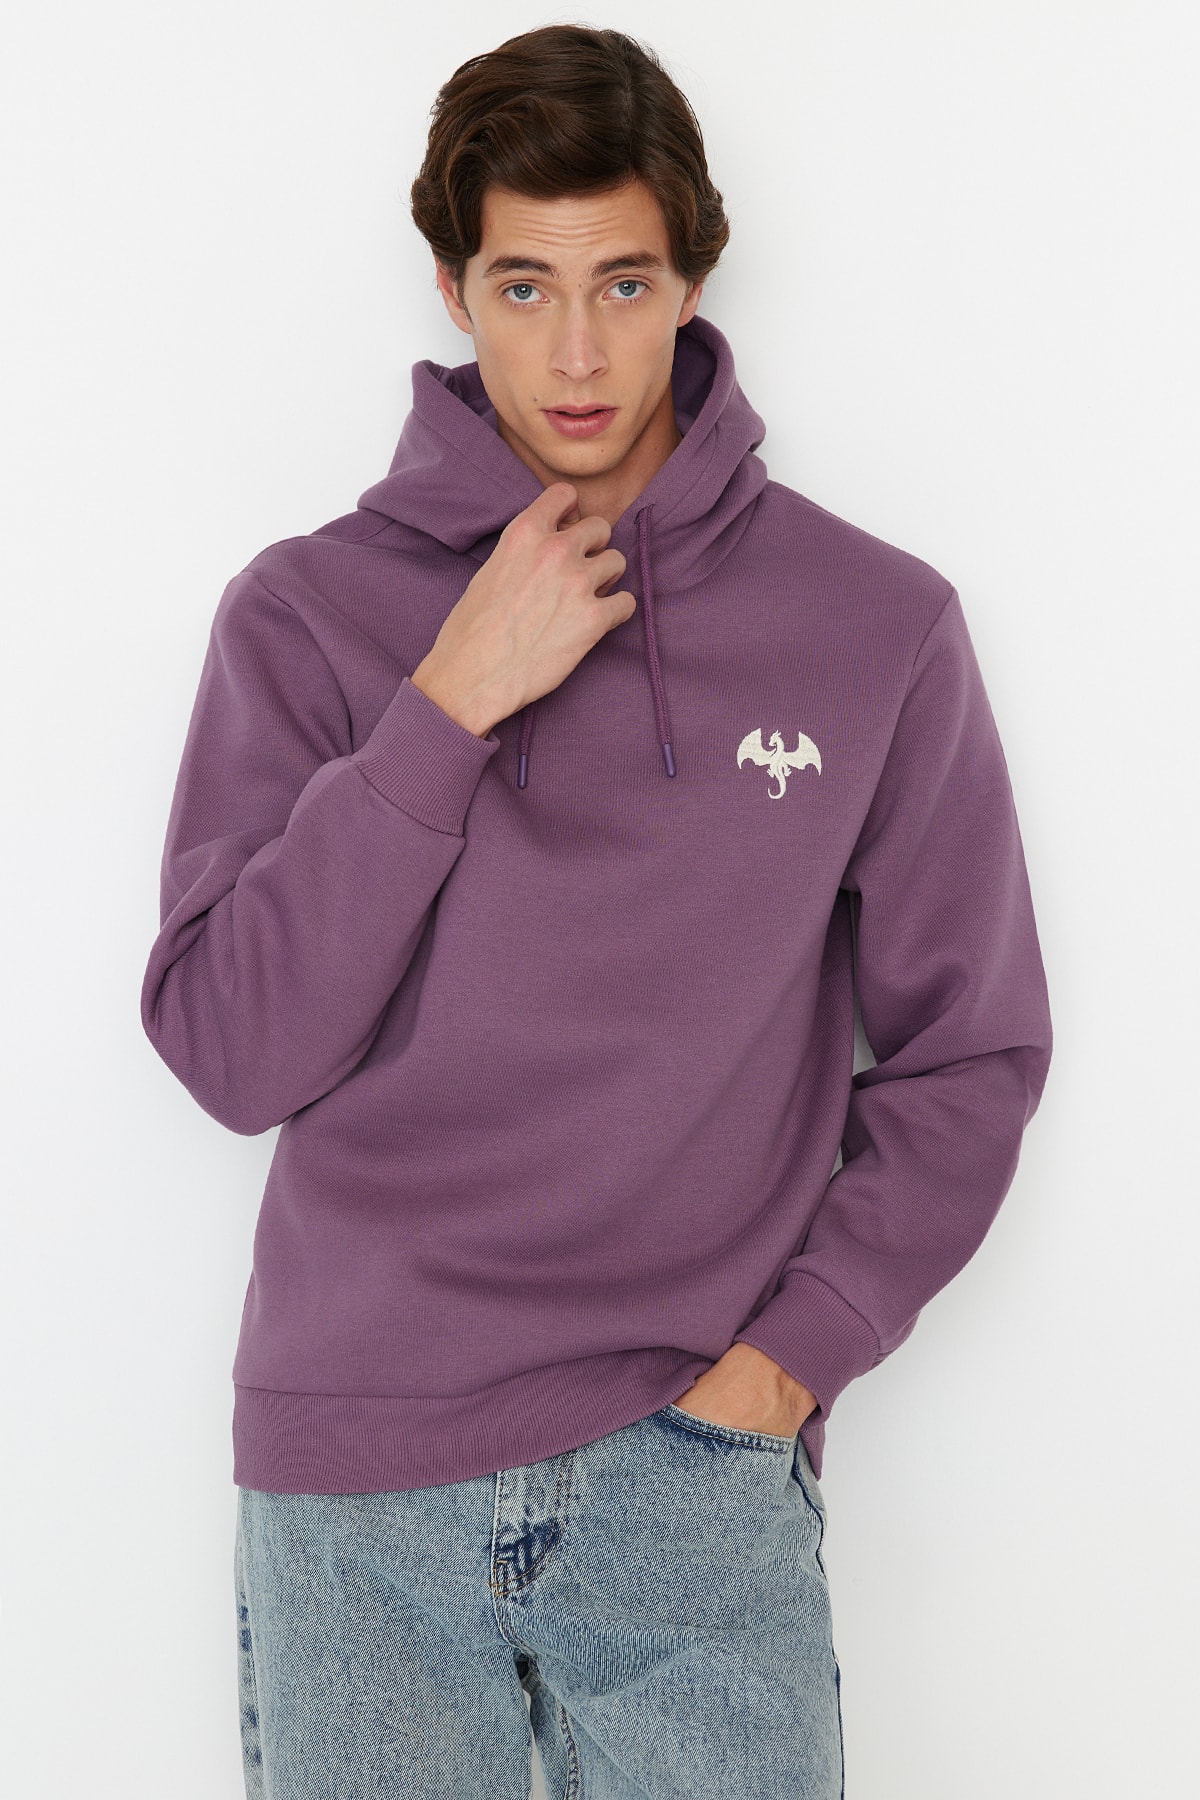 Trendyol Lilac Men's Regular/Normal Cut Sweatshirt with Animal Embroidery and a Soft Fluffy Inside